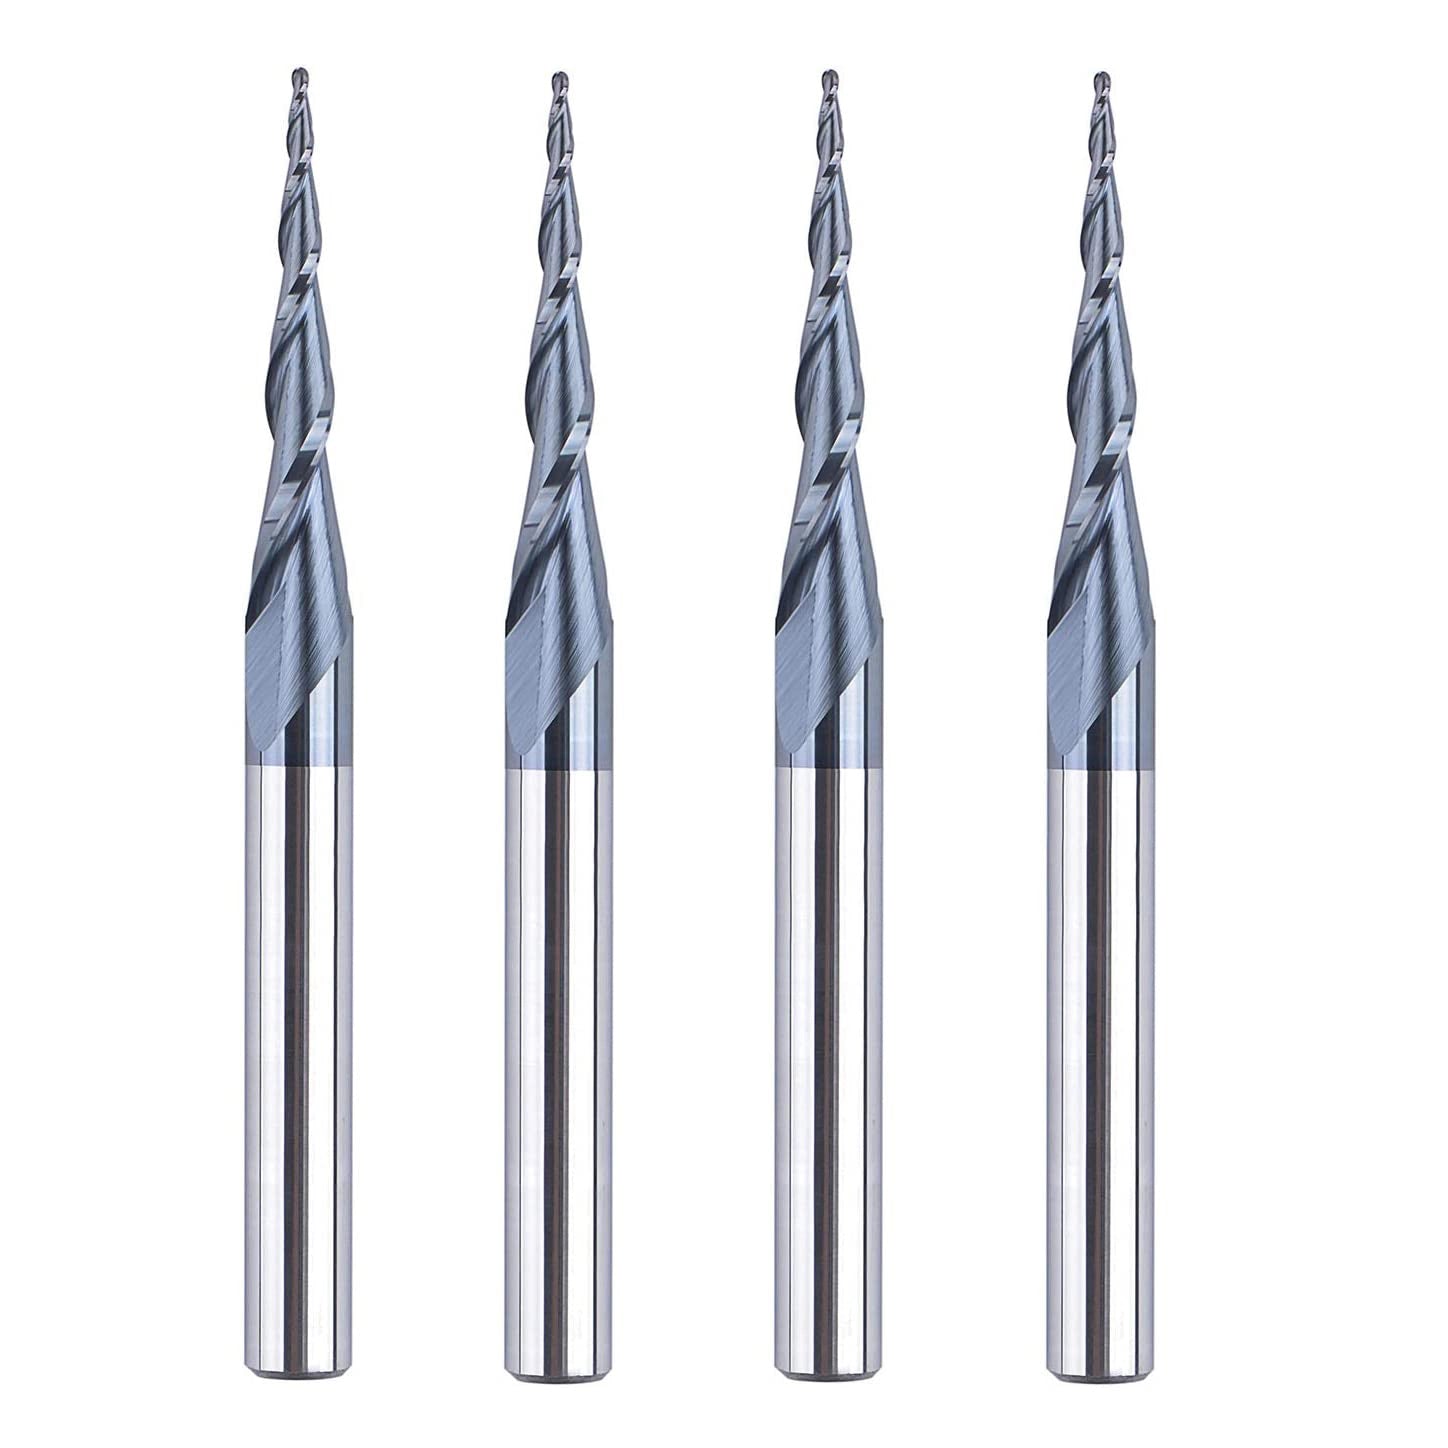 SpeTool W01006 CNC 2D and 3D Carving 4.82 Deg Tapered Angle Ball Nose 0.5mm Radius x 1/4" Shank x 1-1/4" Cutting Length x 3" Long 2 Flute SC TiAlN Coated Upcut Router Bit